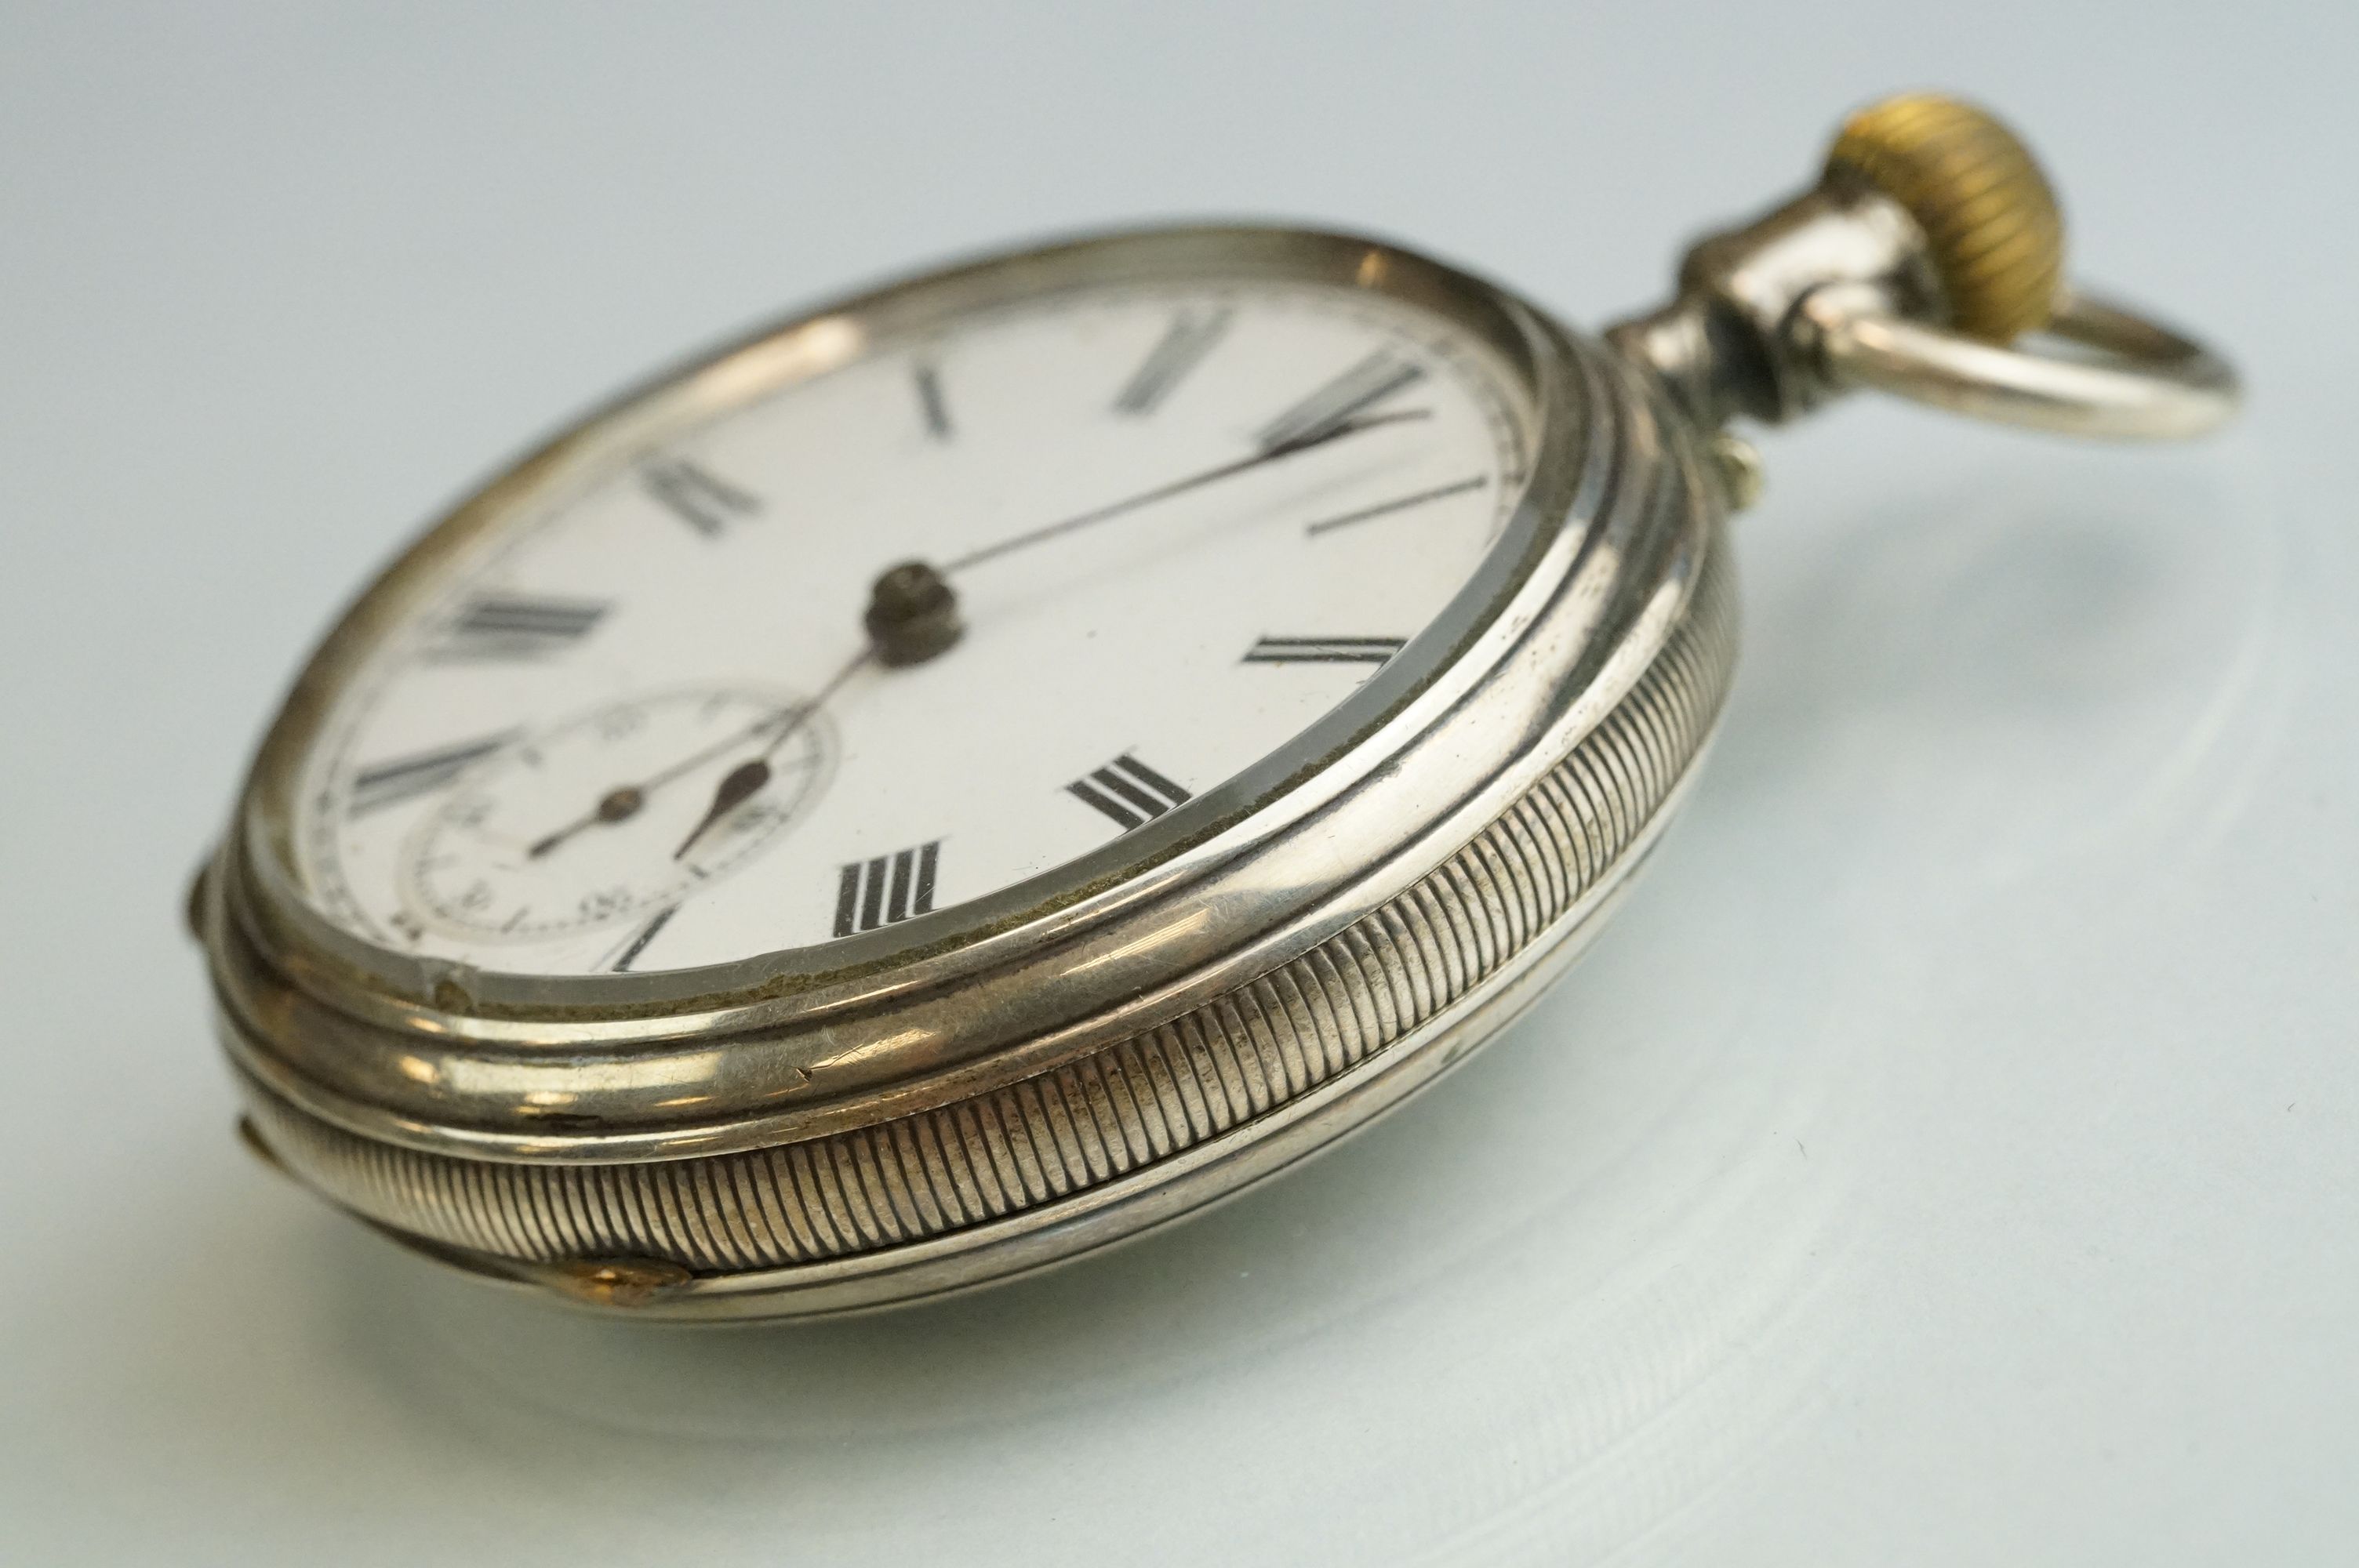 Silver open faced crown-wind pocket watch with black Roman numerals on a white enamel dial, - Image 3 of 8